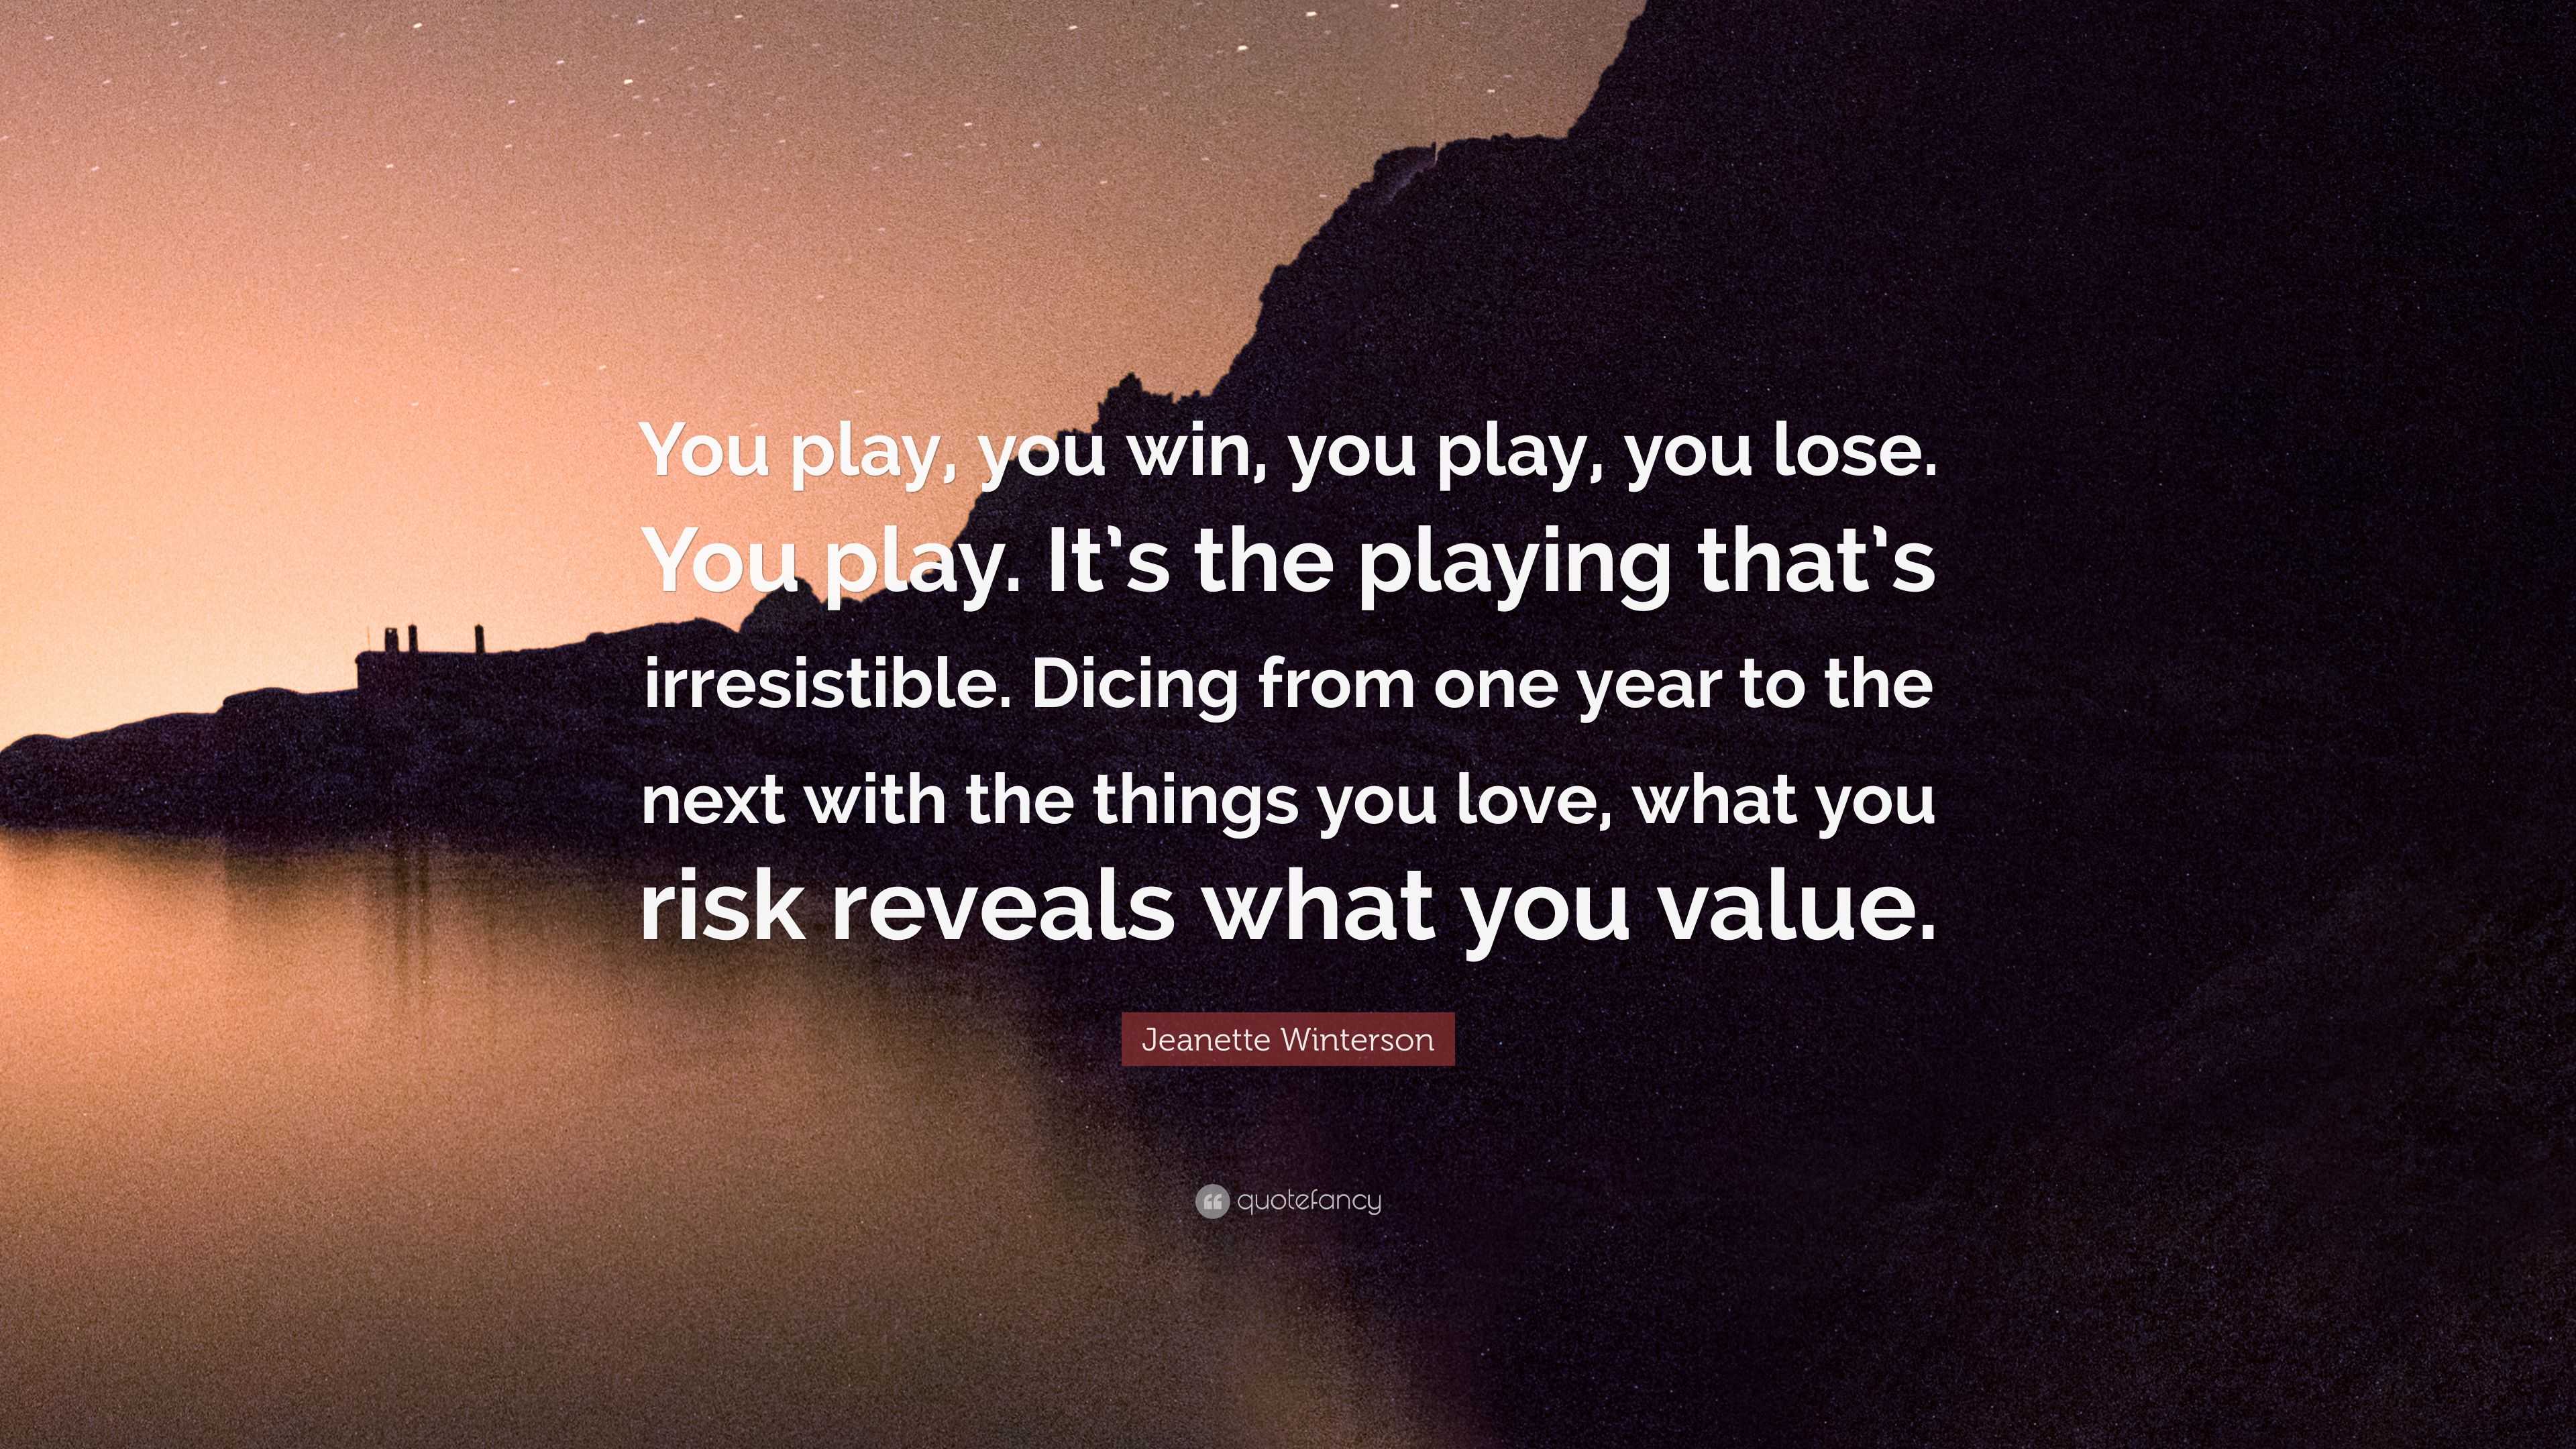 Jeanette Winterson Quote: “You play, you win, you play, you lose. You ...